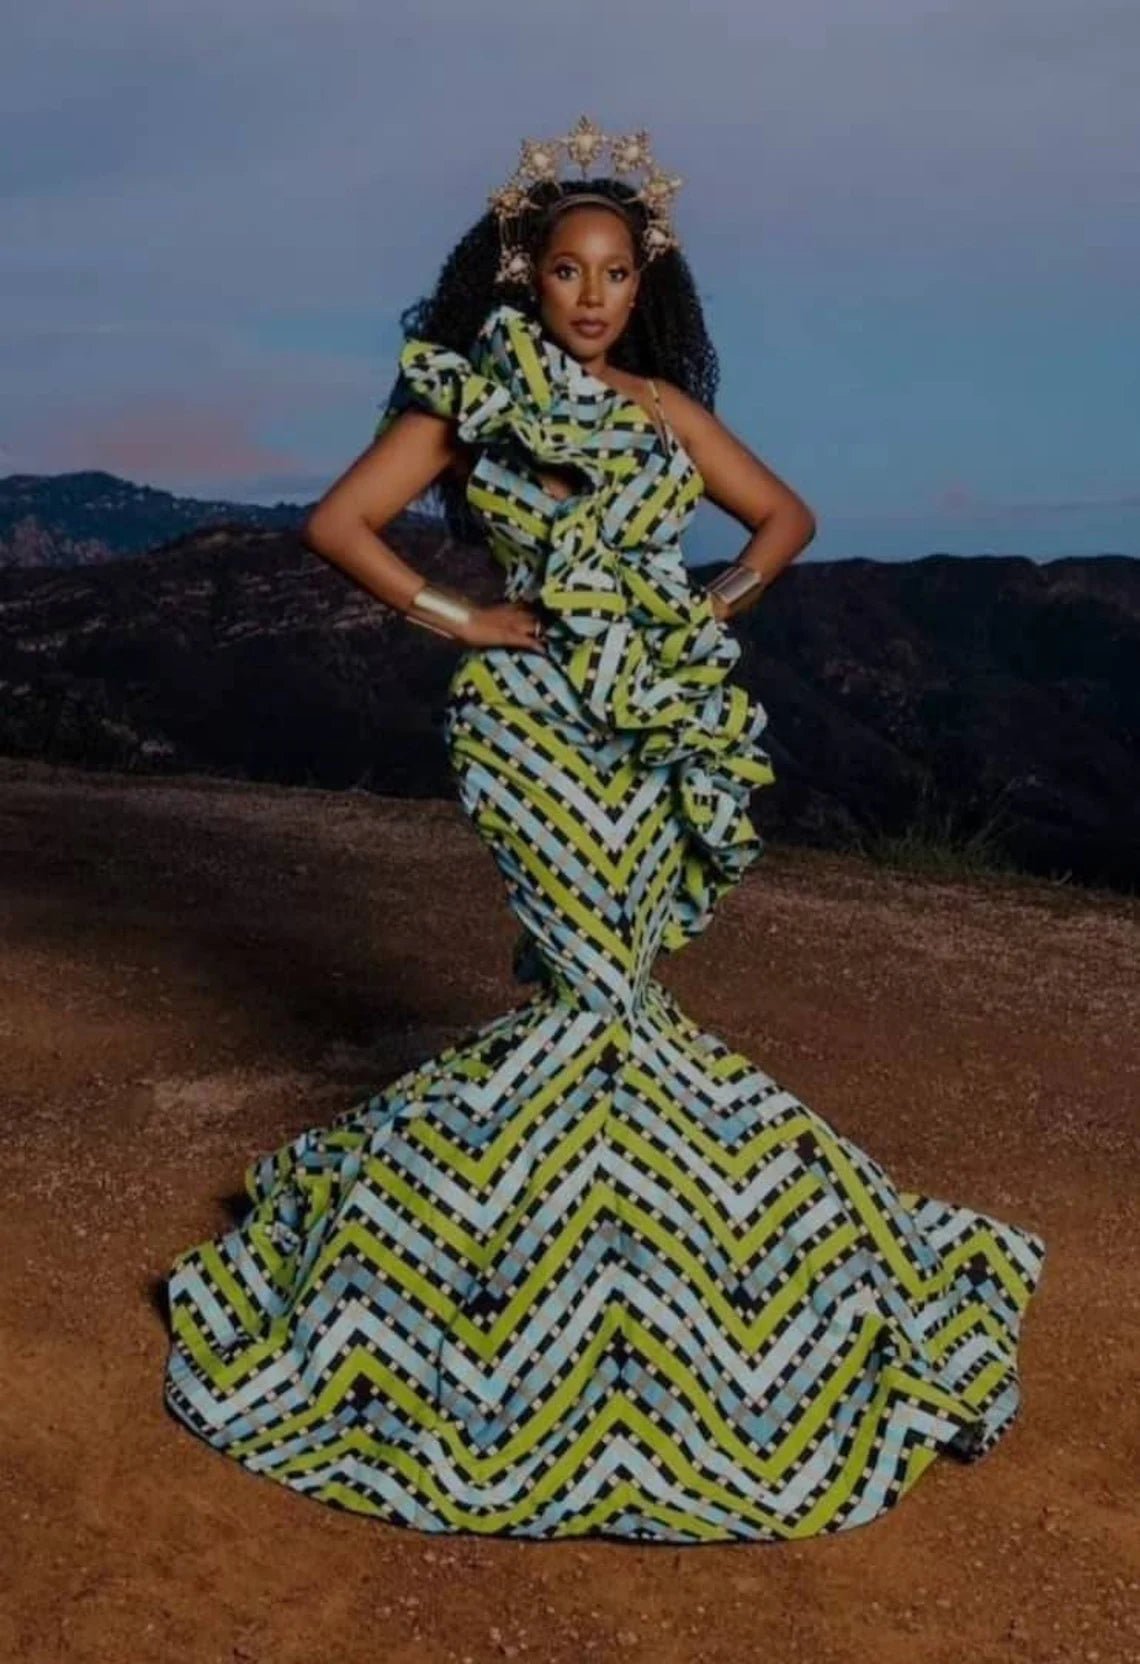 Exquisite African Mermaid Dresses: Ankara Maxi Gowns Perfect for Proms and Theme Birthday Celebrations - Flexi Africa - Flexi Africa offers Free Delivery Worldwide - Vibrant African traditional clothing showcasing bold prints and intricate designs